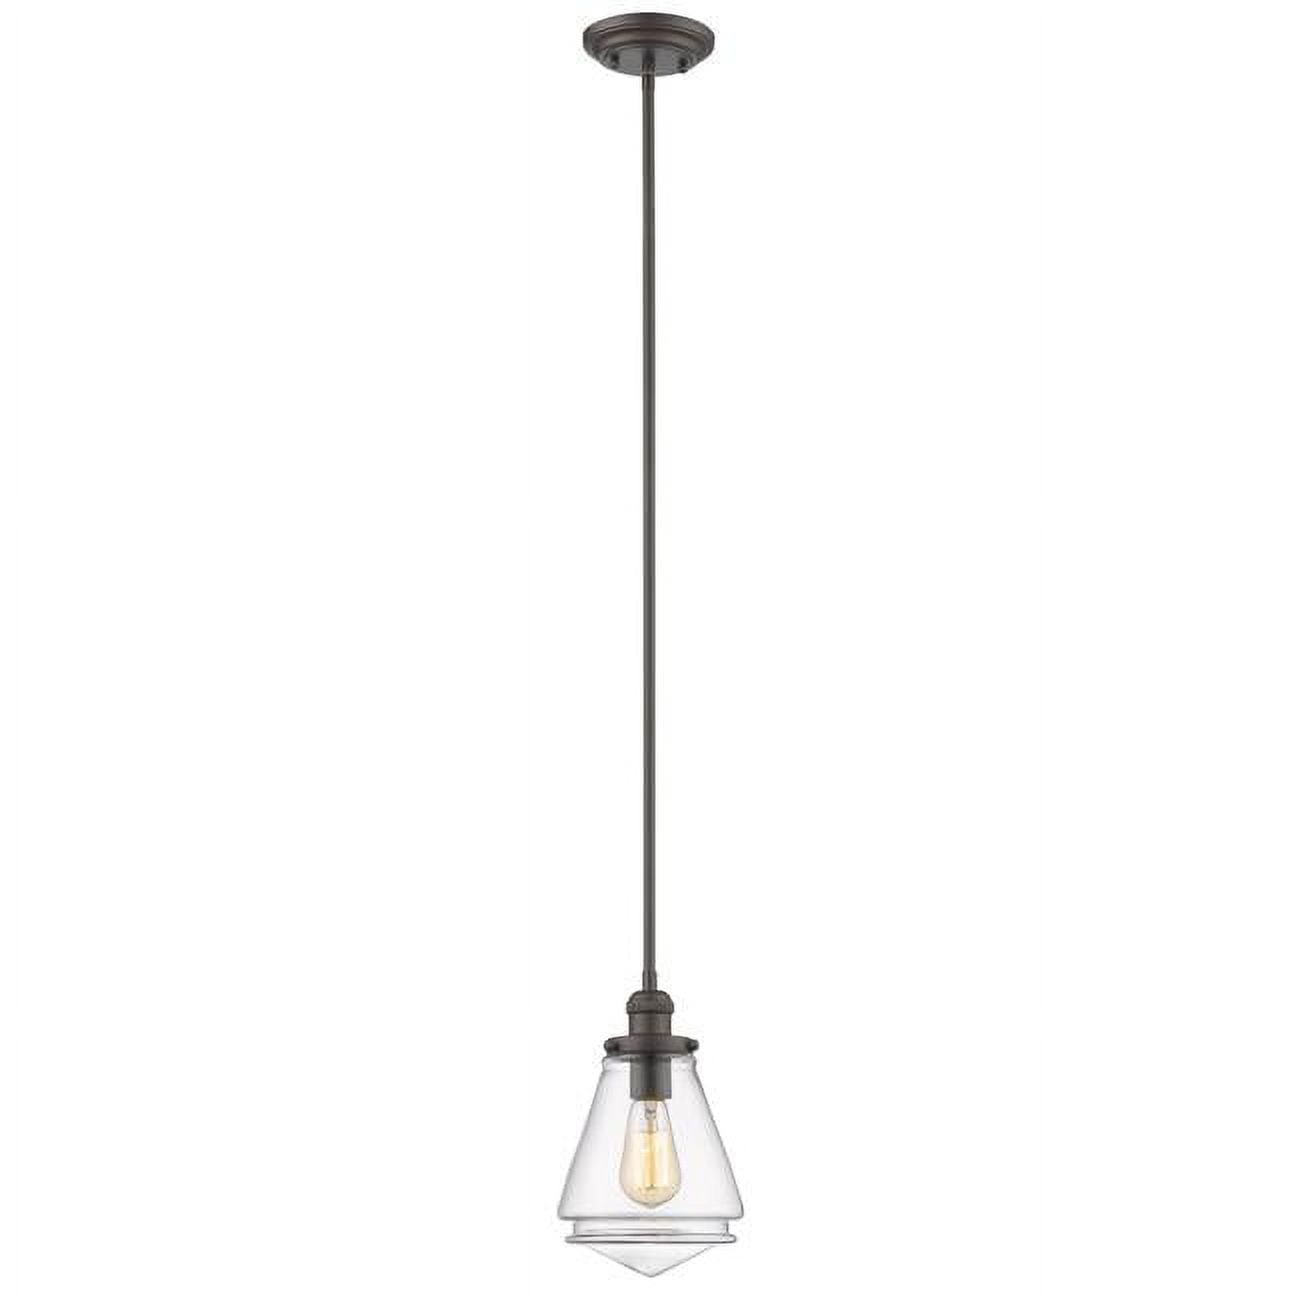 Ch2s177rb07-dp1 Gabriella Transitional 1 Light Rubbed Bronze Ceiling Mini Pendant - 7 In.